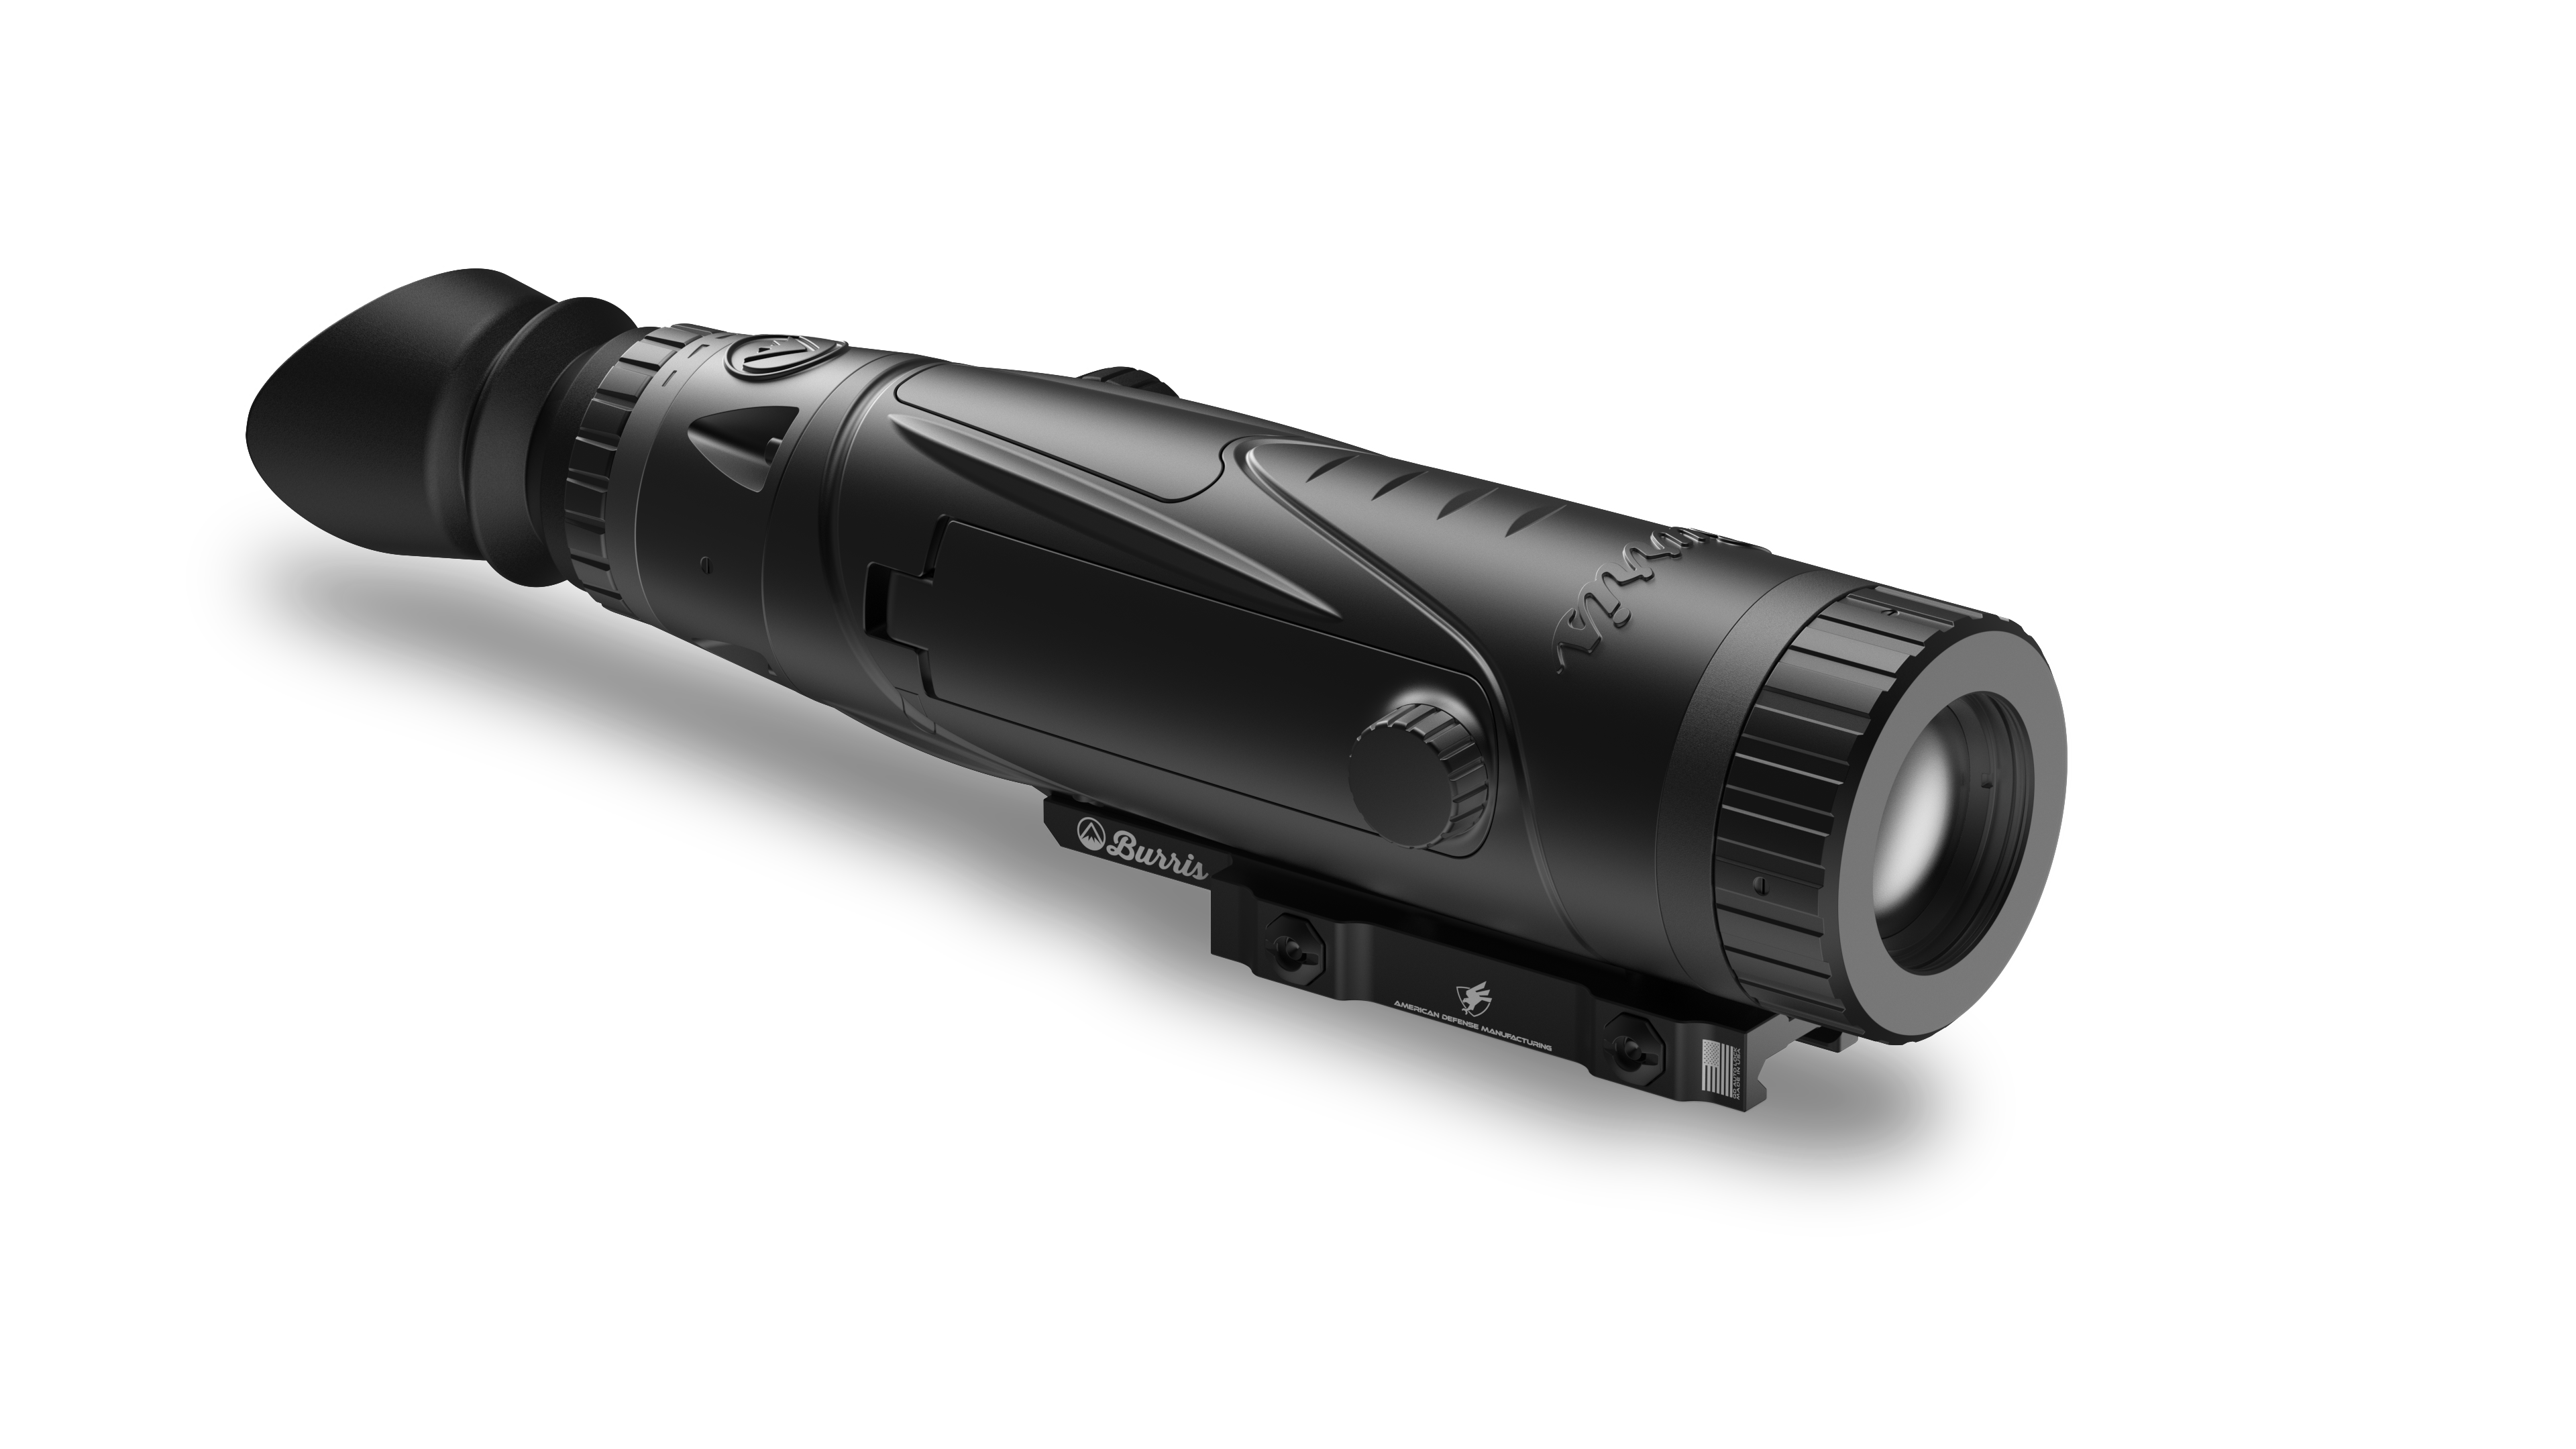 burris-thermal-v2-riflescope-now-available-thegunmag-the-official-gun-magazine-of-the-second